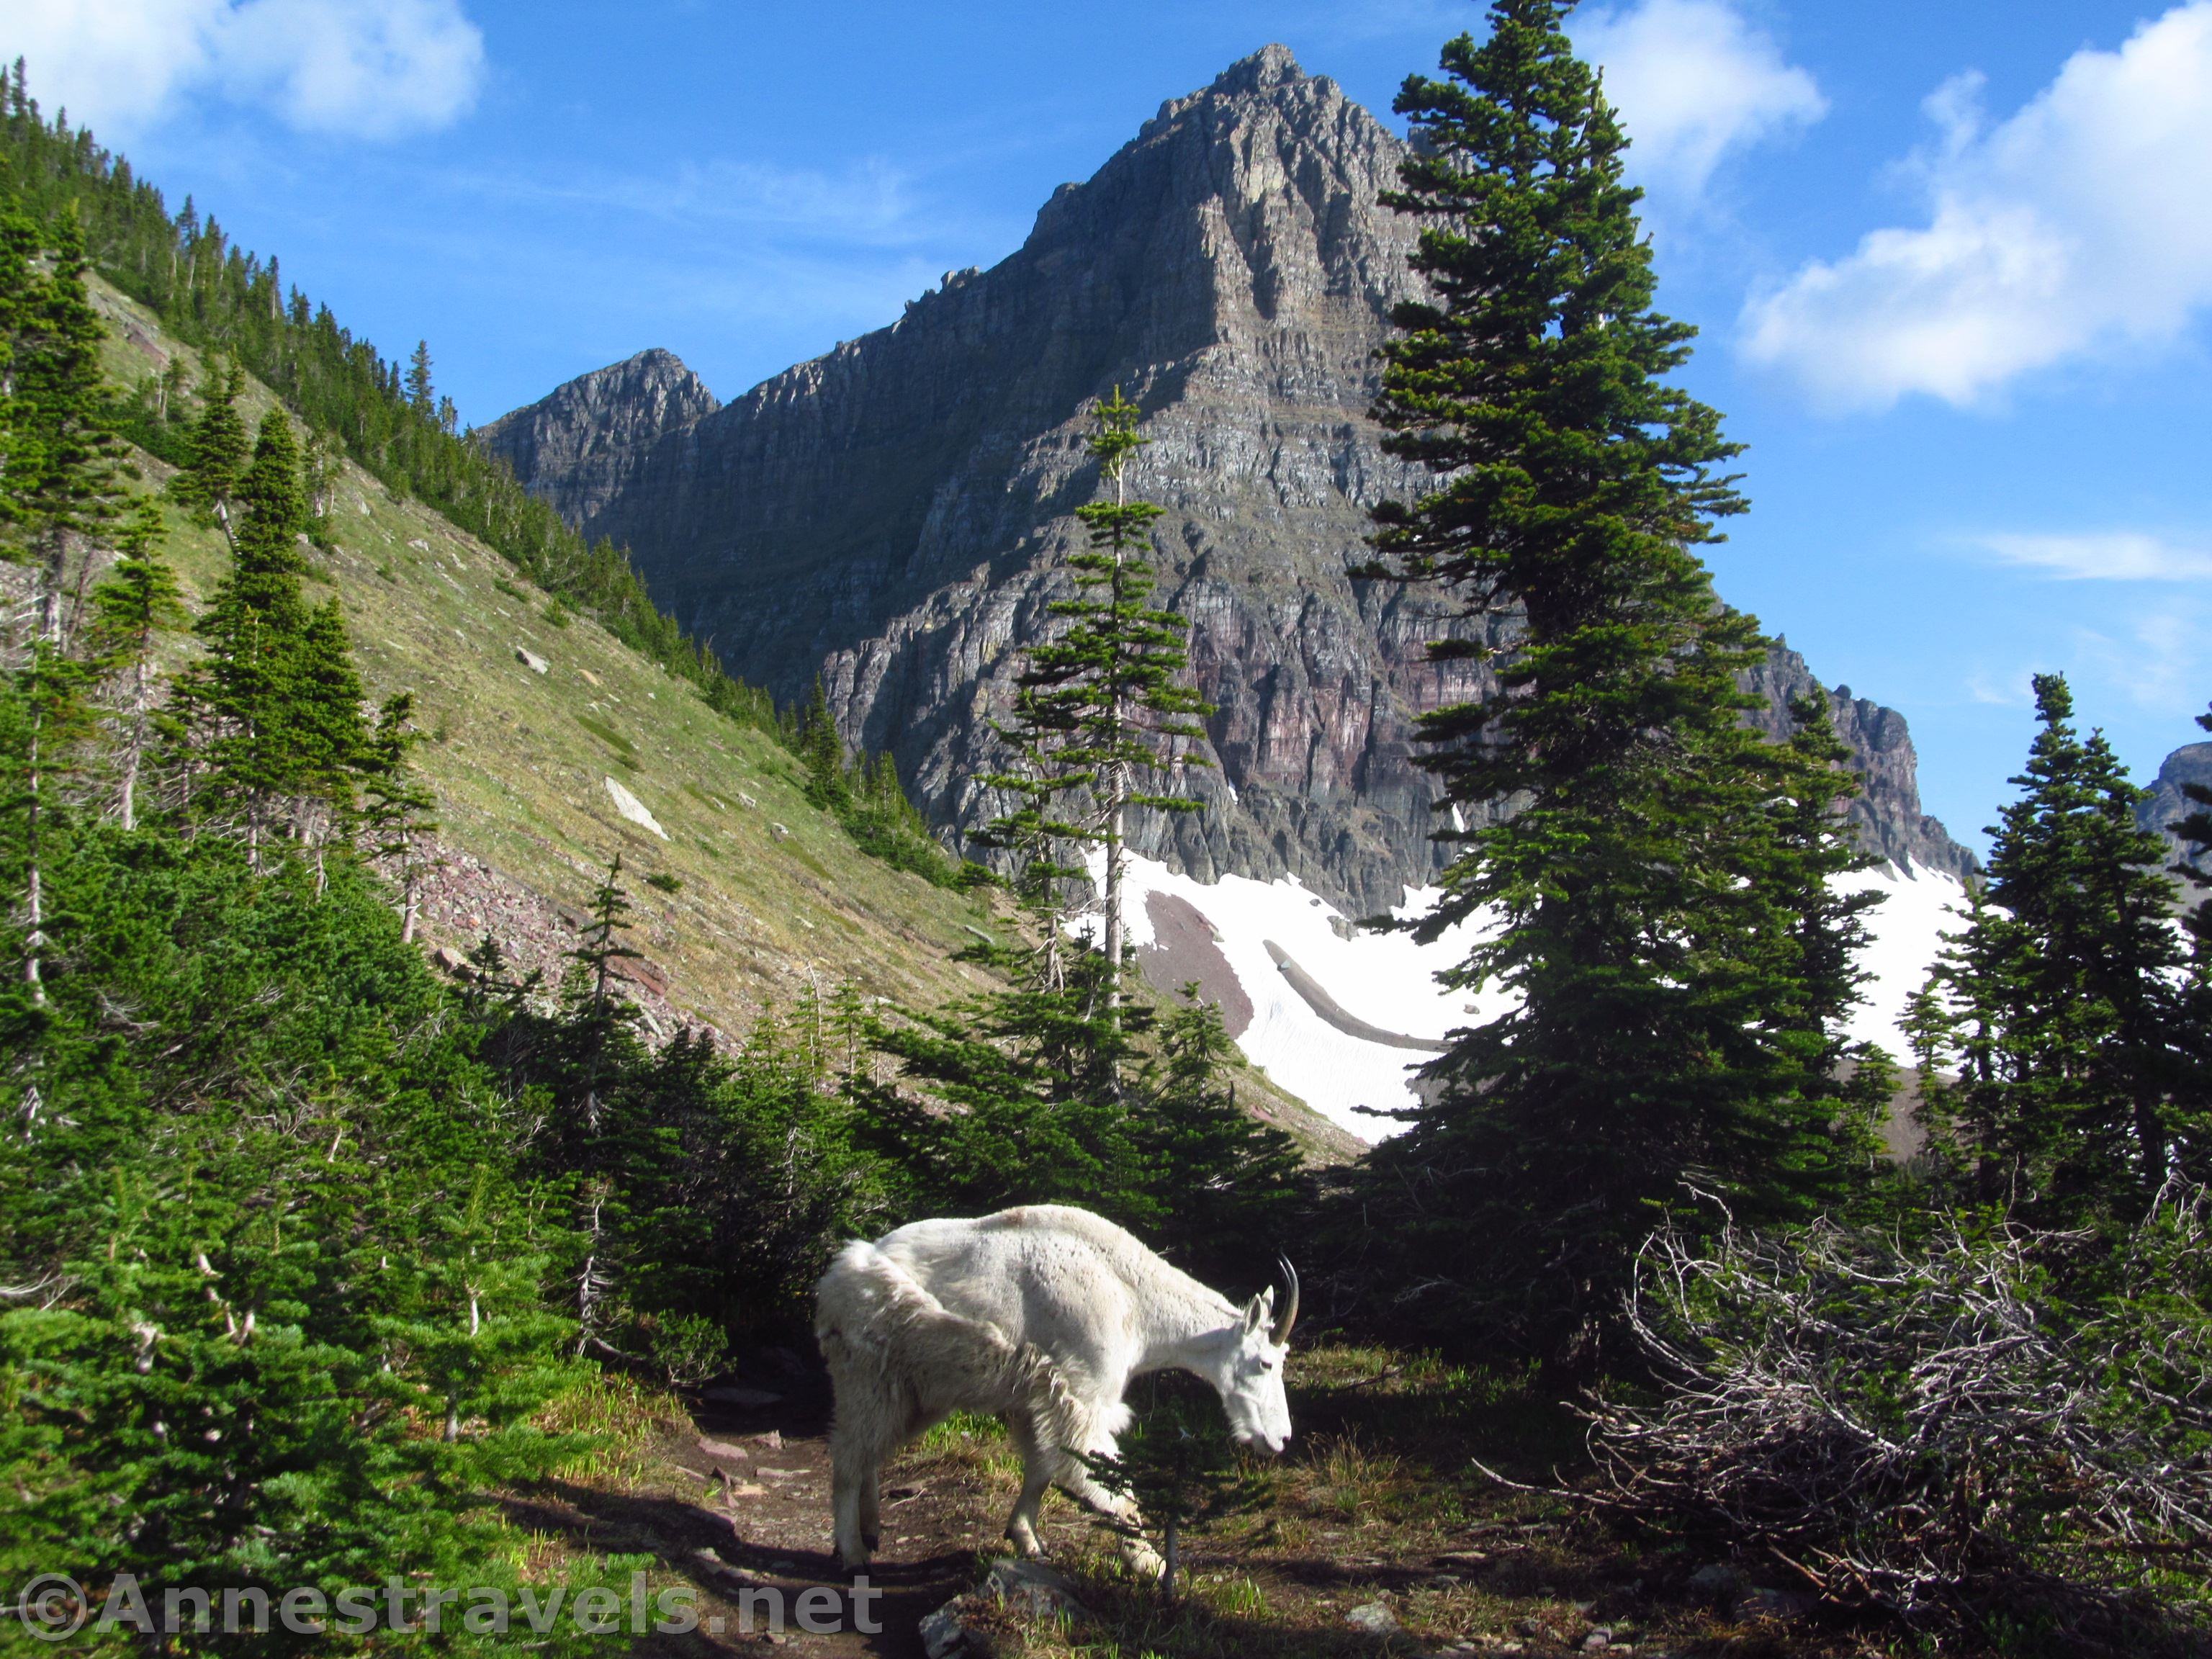 A mountain goat in Glacier National Park, Montana